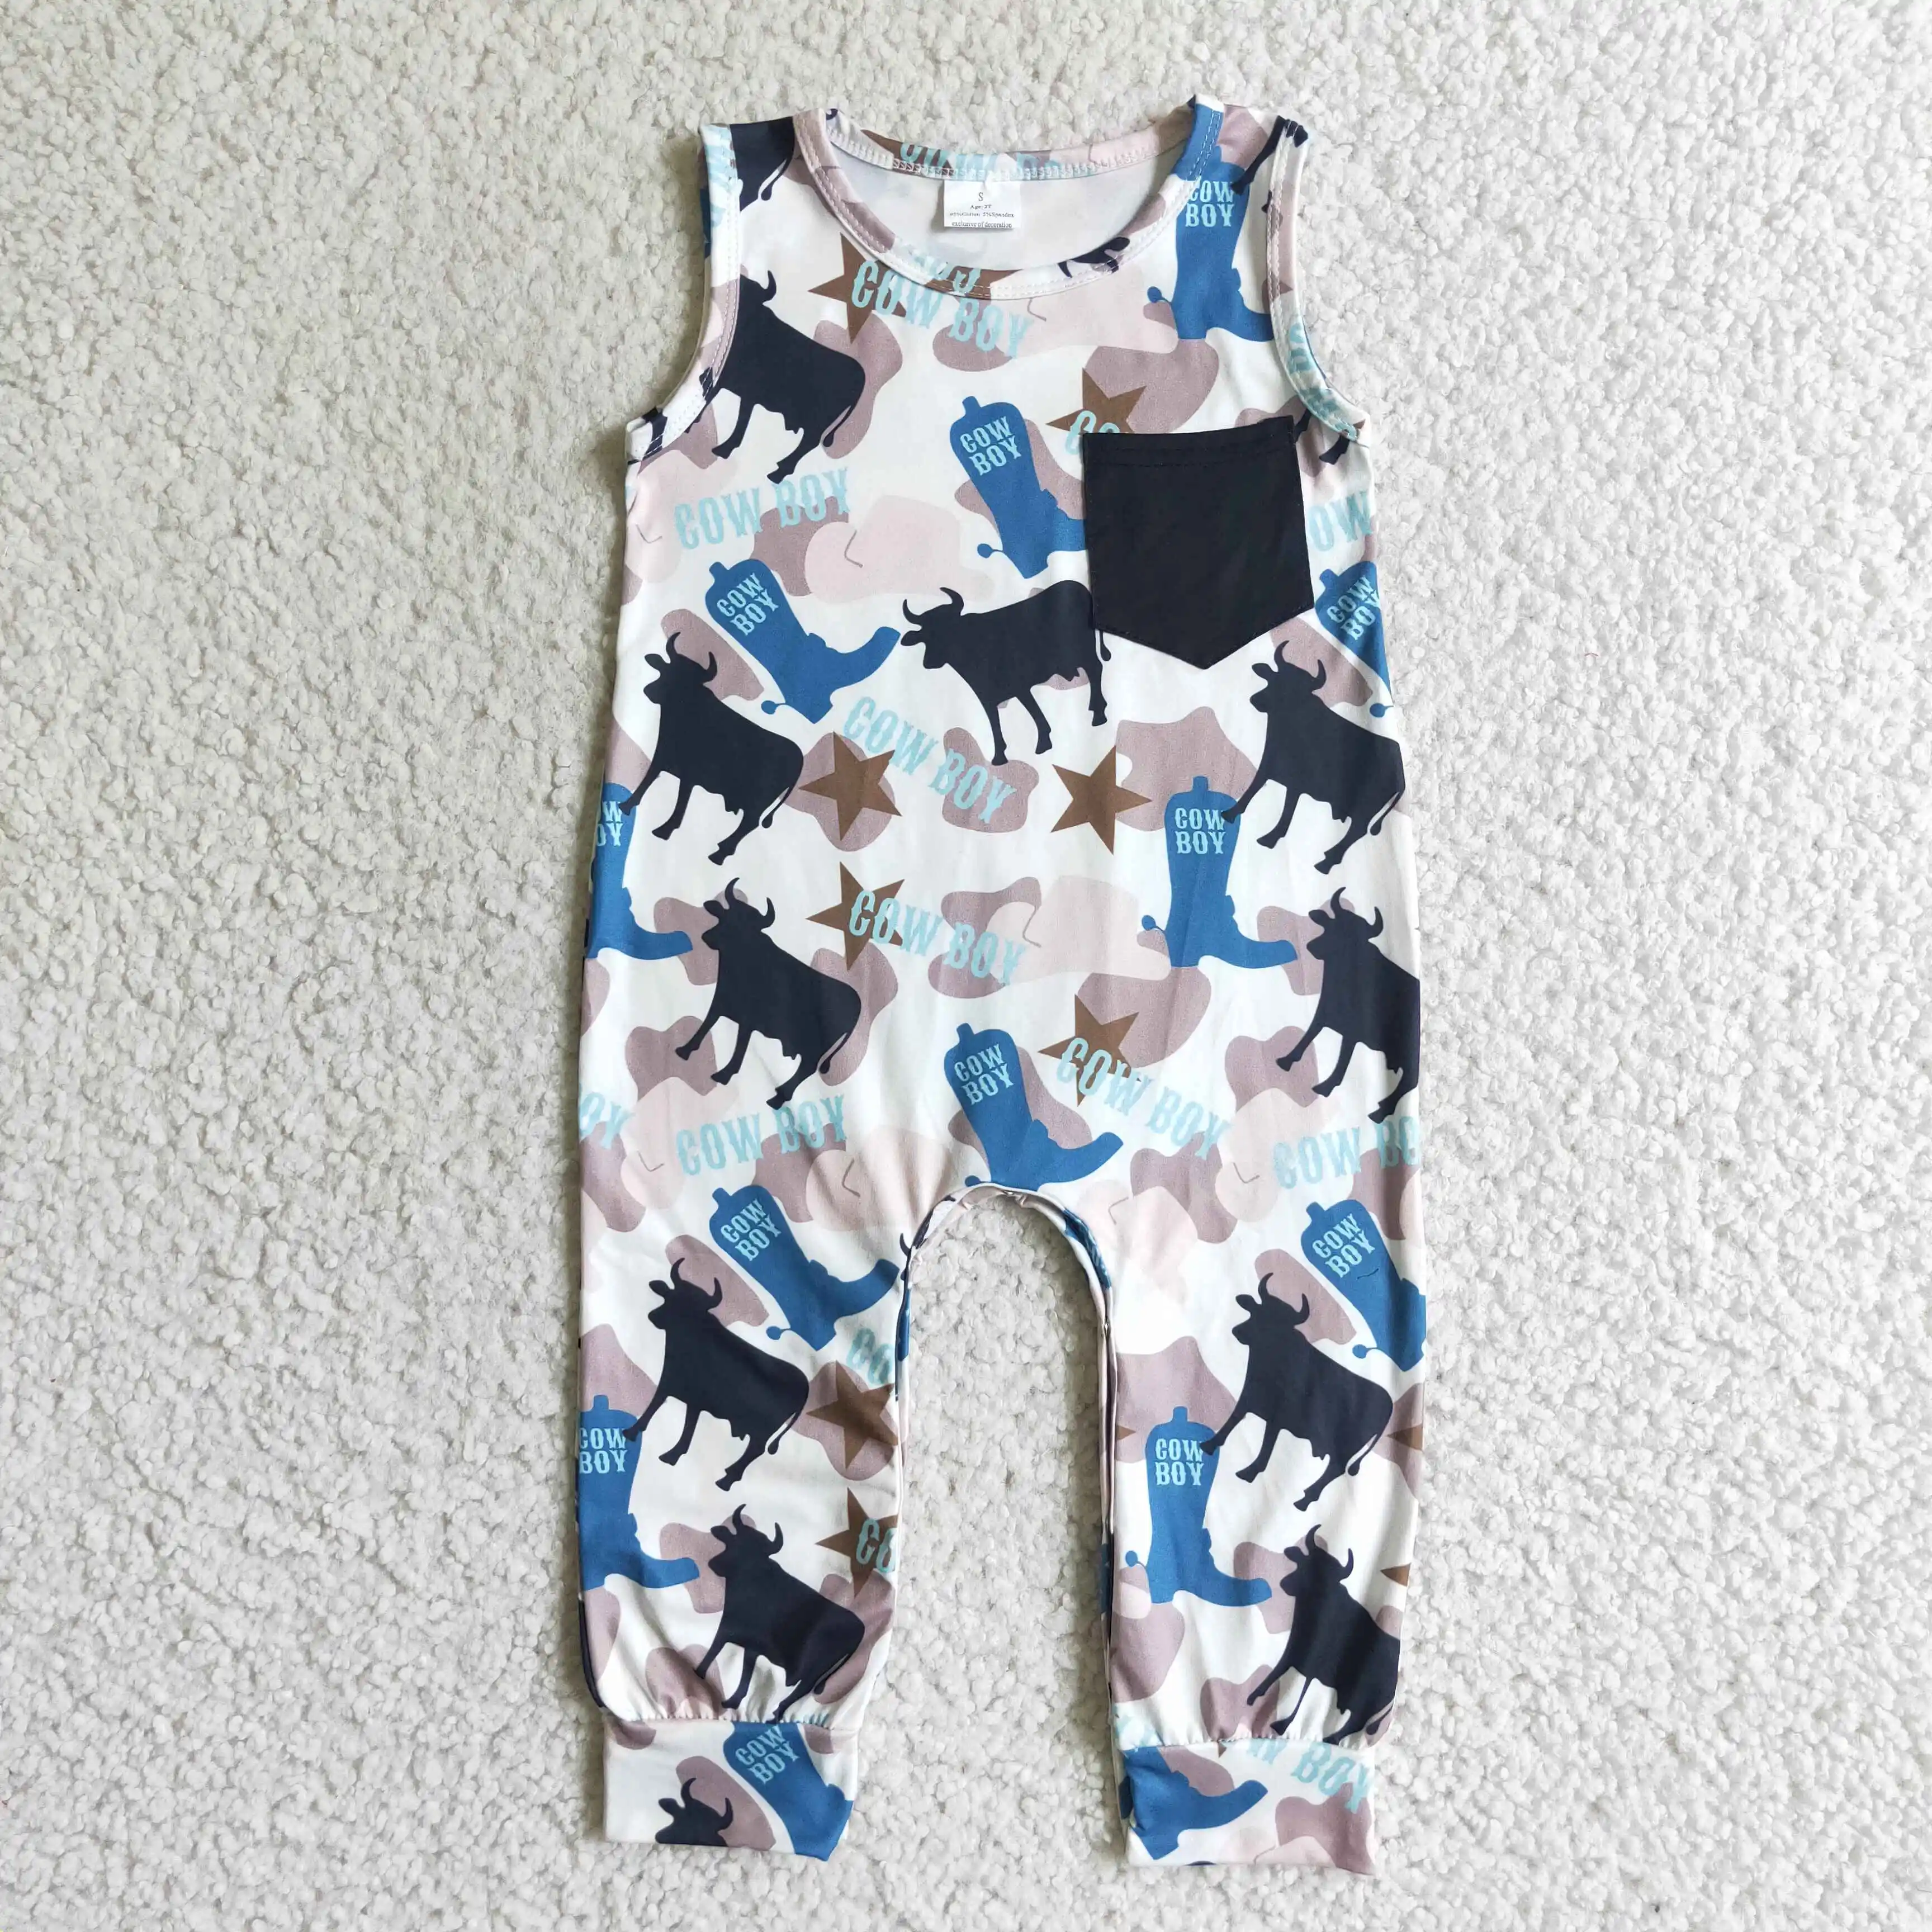 

Bulk Supply RTS NO MOQ Cow Print Baby Cowboy Bodysuits Infants Sleeveless Toddlers Newborn Rompers For Boys